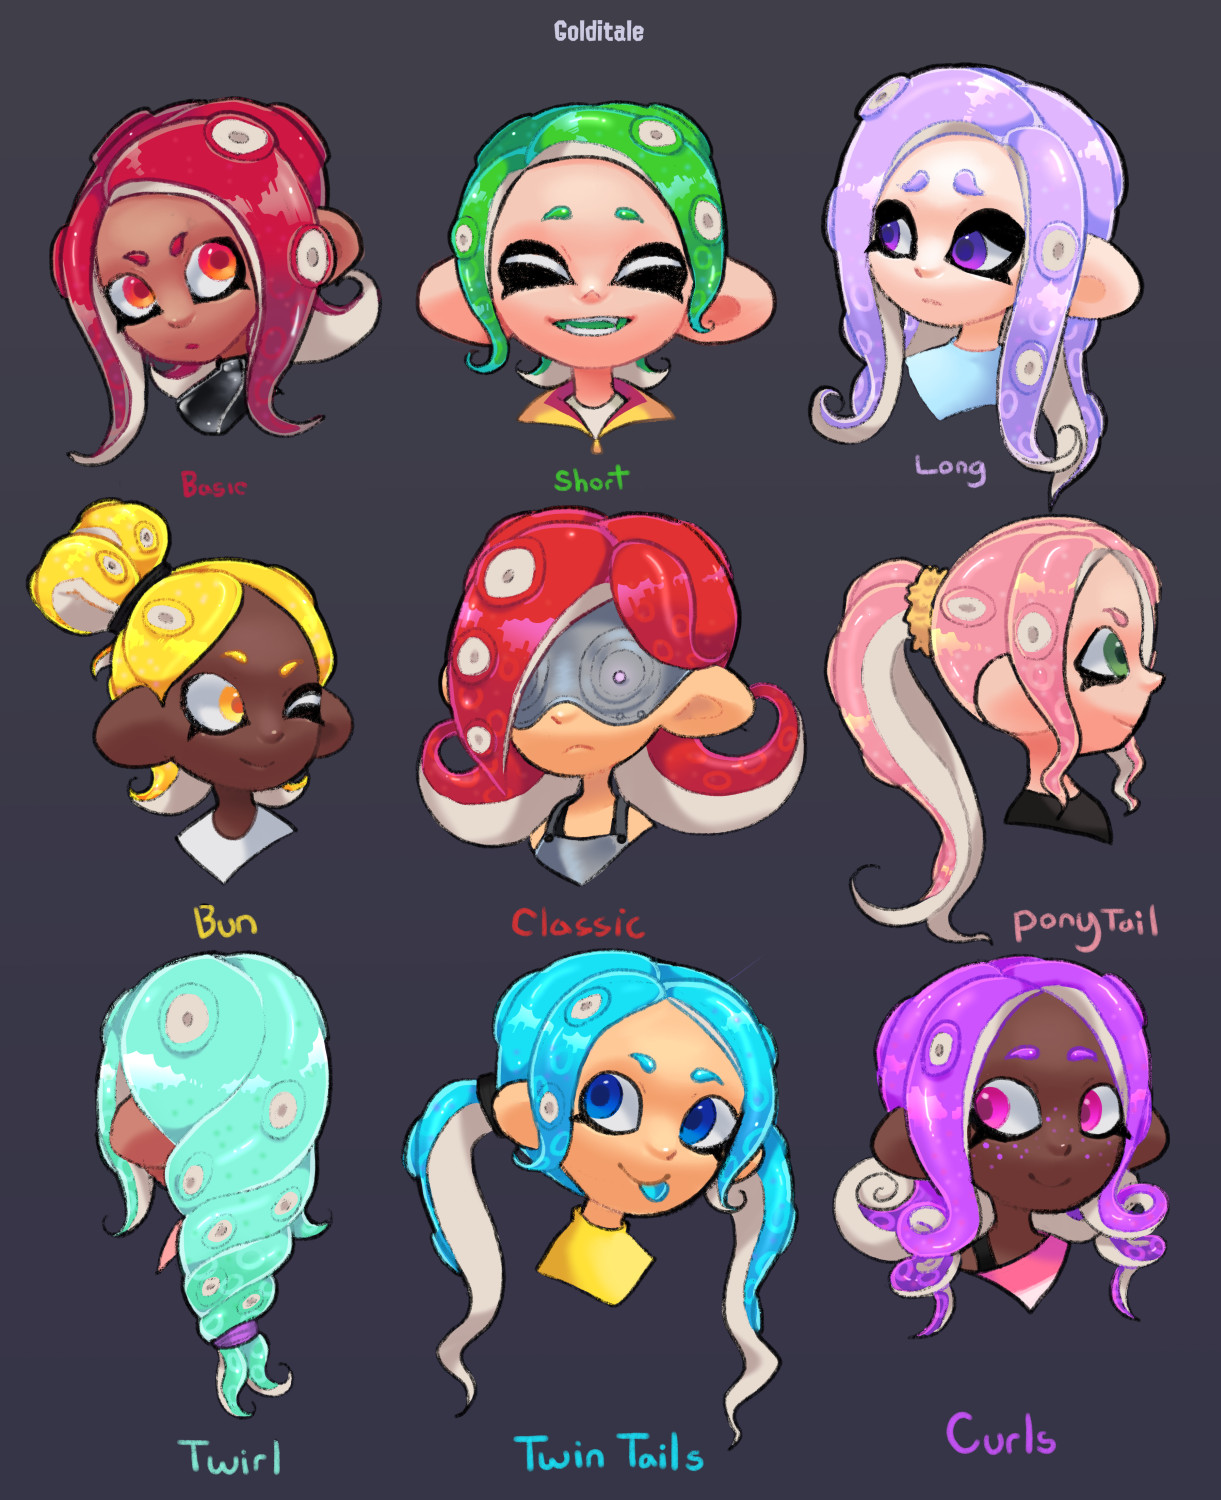 Inkling Girl Hairstyles
 I Made some new Octoling girl hairstyles splatoon